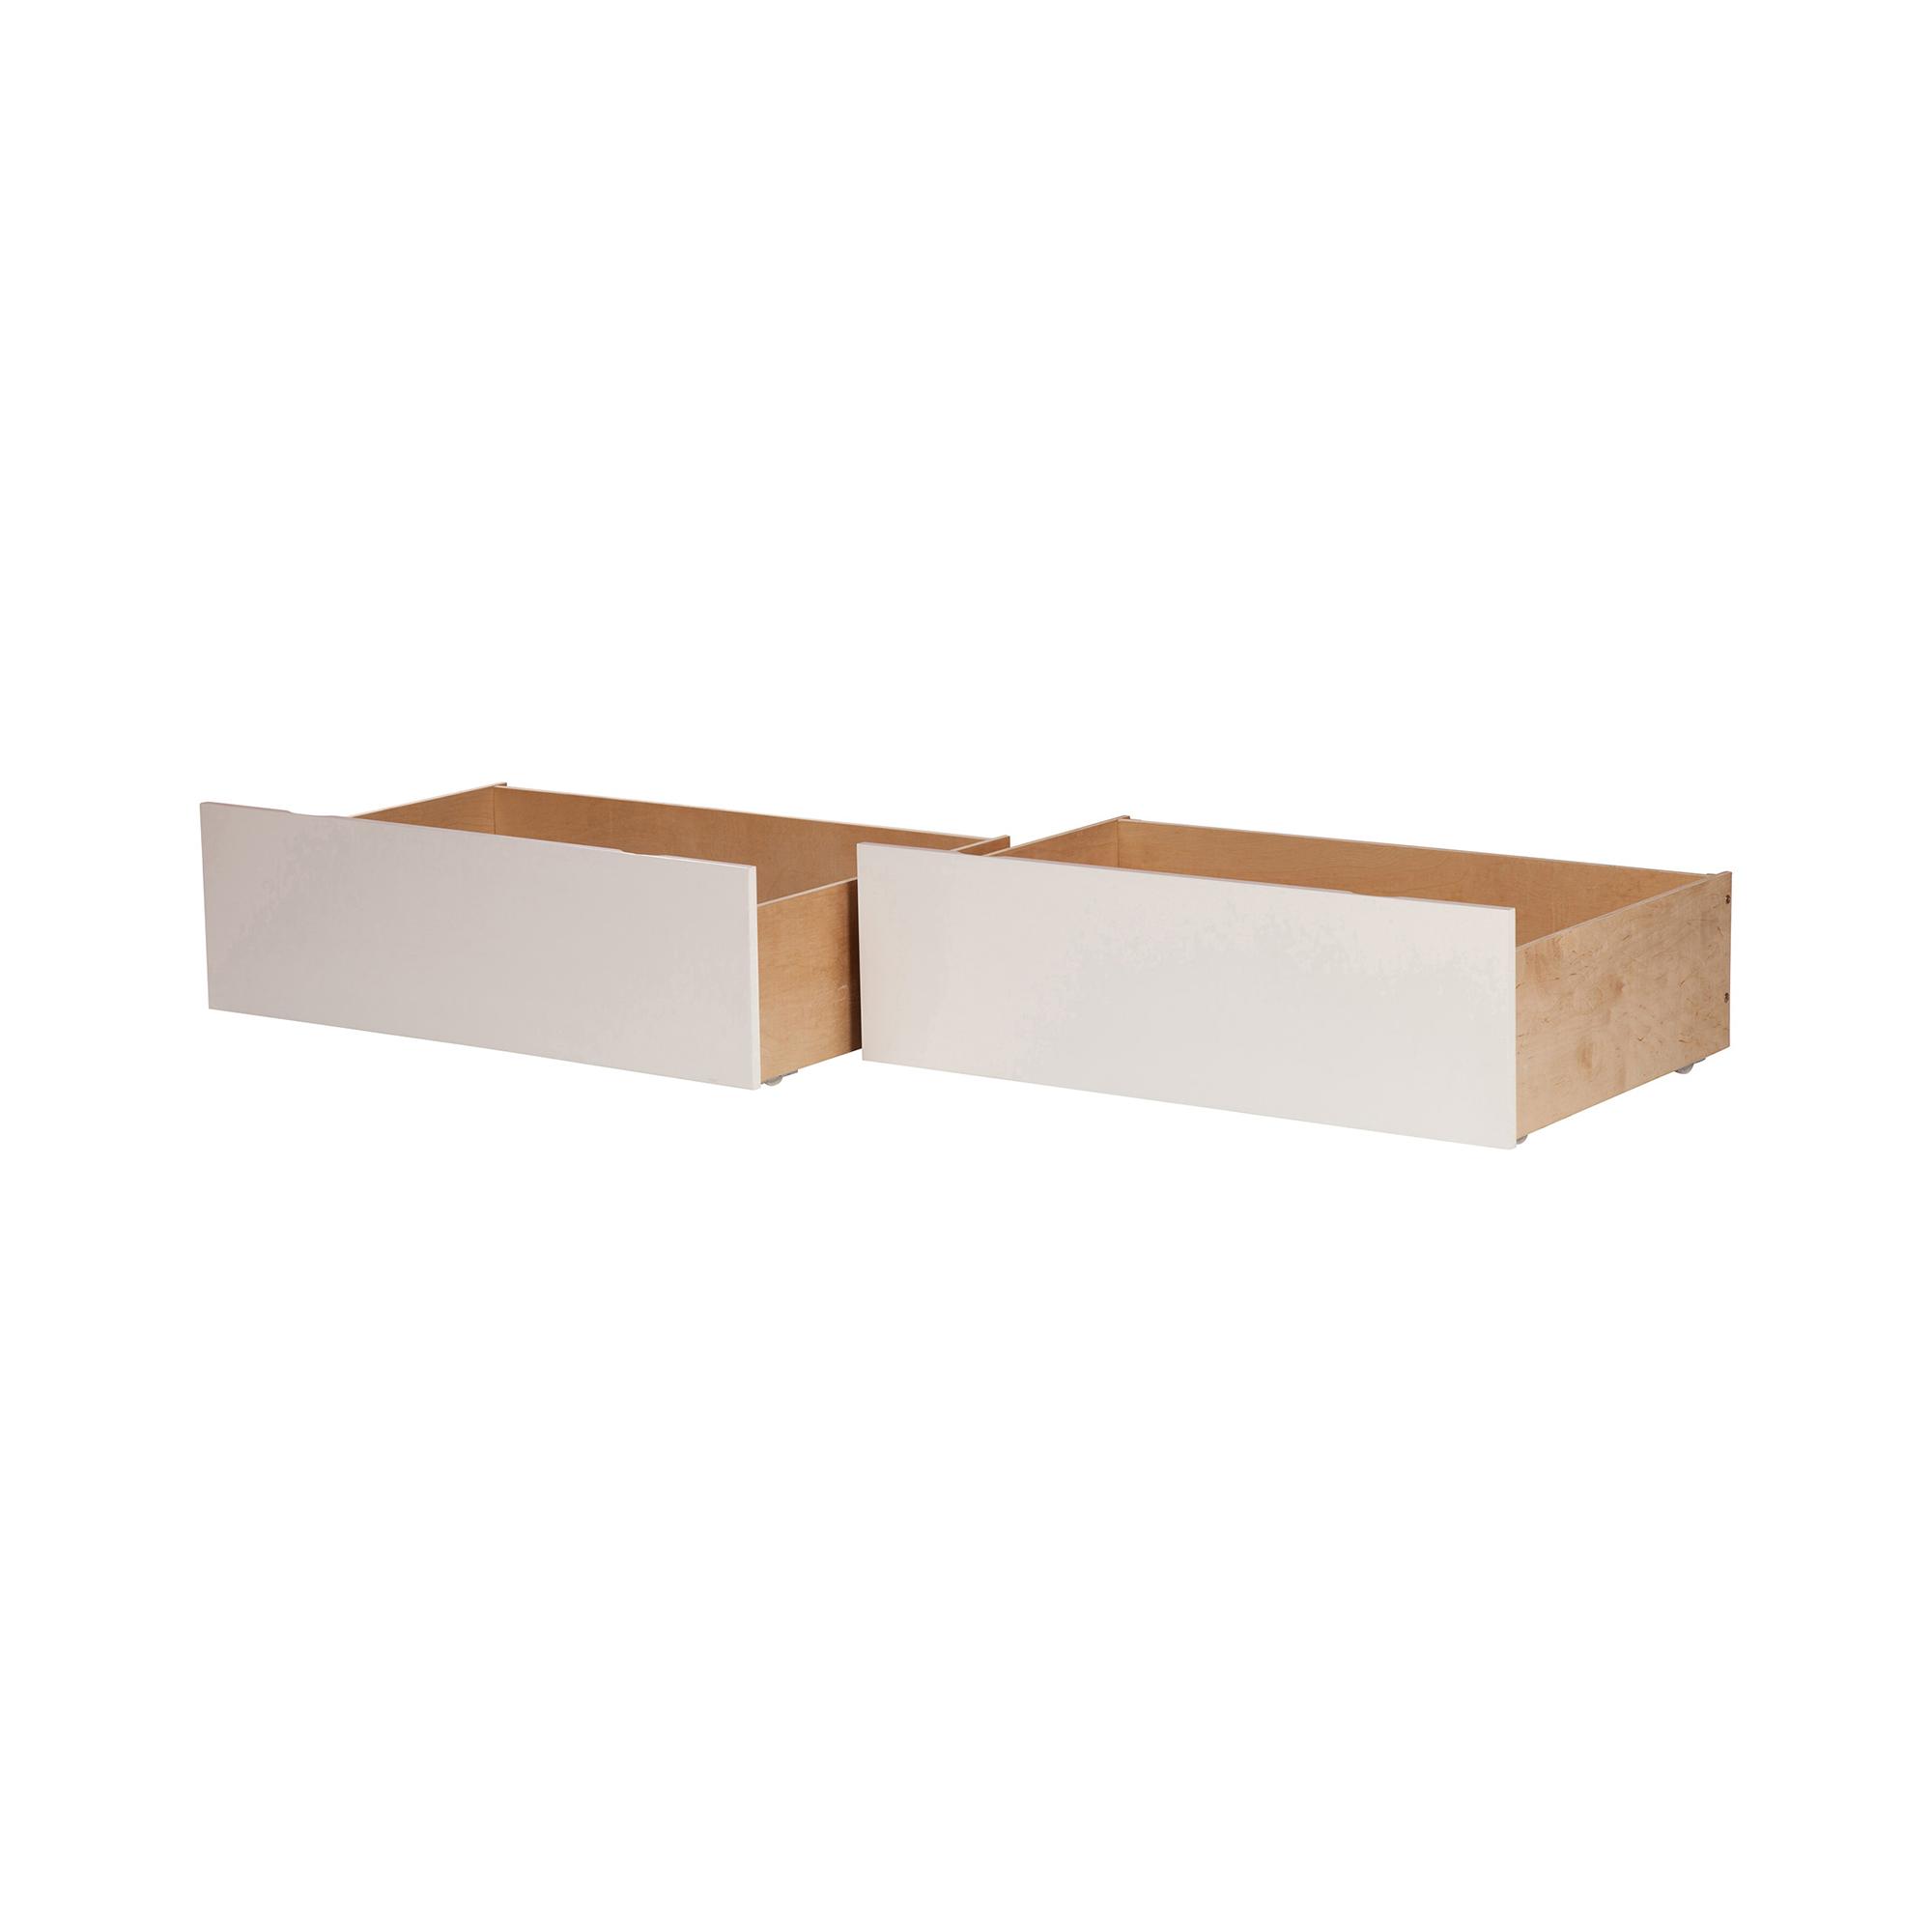 Urban Bed Drawers Twin-Full White - image 1 of 4